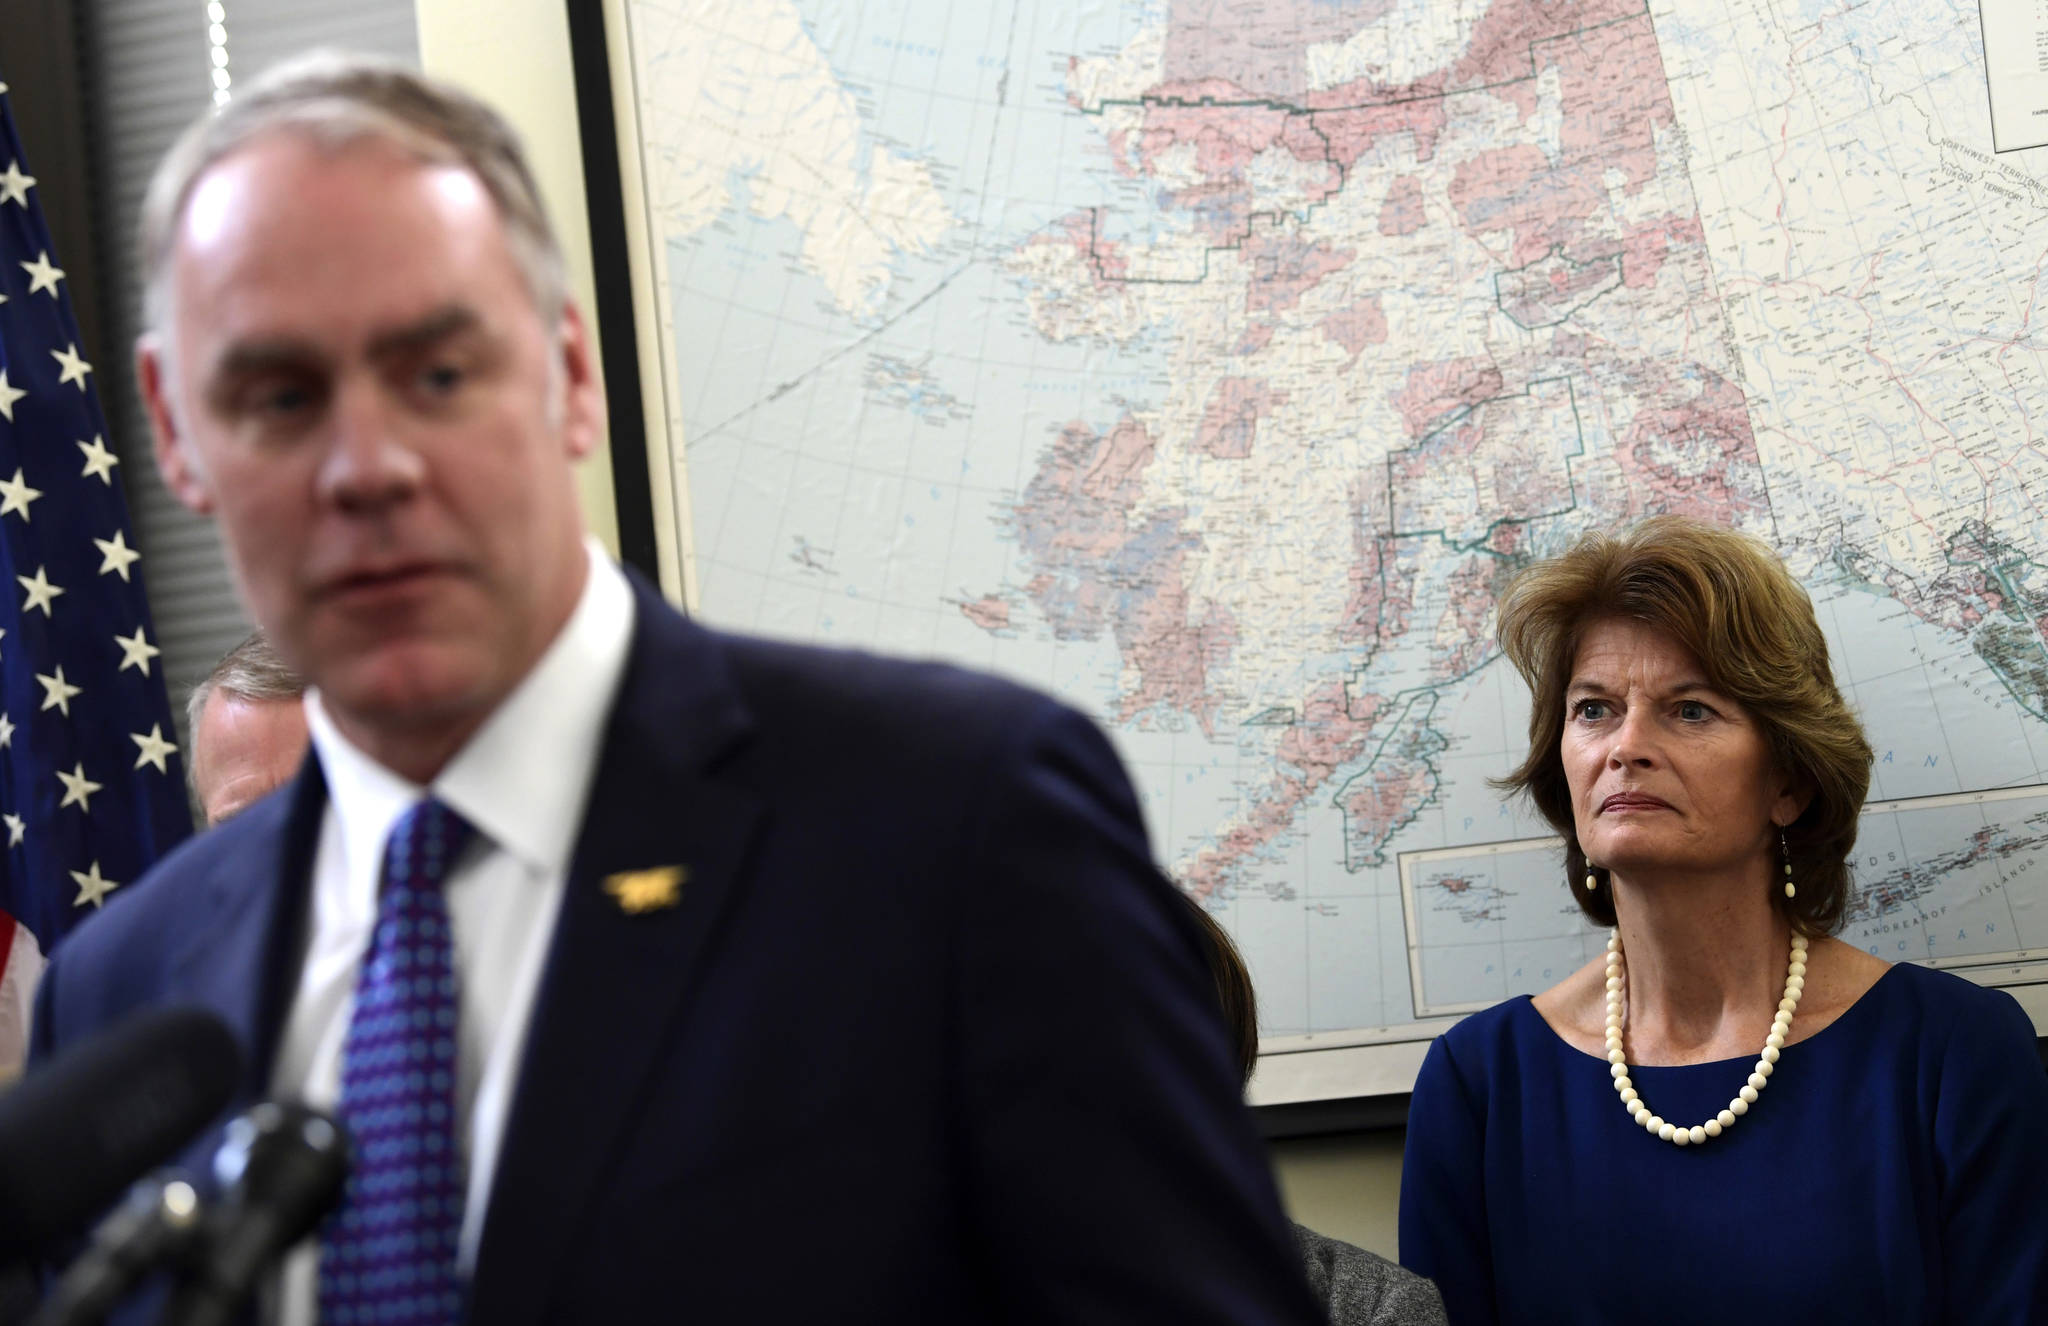 Sen. Lisa Murkowski, R-Alaska, right, listens as Interior Secretary Ryan Zinke, right, speaks during an event in her office on Capitol Hill in Washington, Monday, Jan. 22, 2018. Murkowski was joined by other Alaskan officials regarding the Interior Department’s decision to the construction of a road through a national wildlife refuge in Alaska. The road would connect the communities of King Cove and Cold Bay, which has an all-weather airport needed for emergency medical flights. (AP Photo/Susan Walsh)